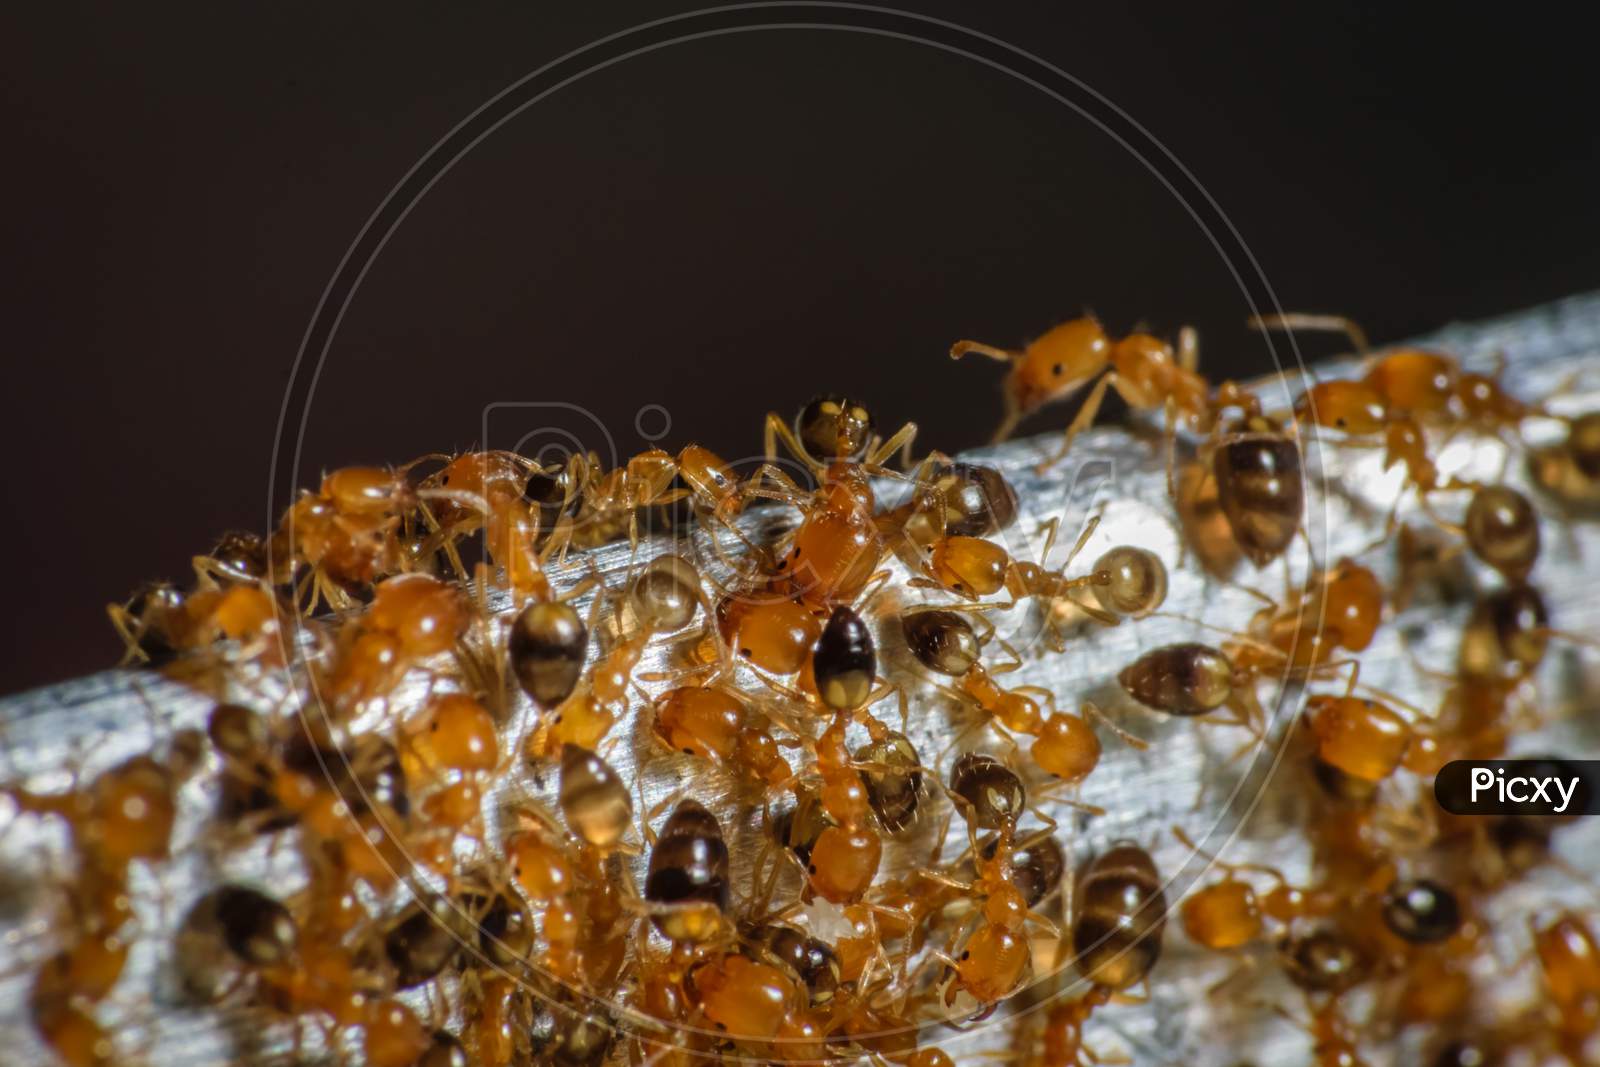 Group Of Pharaoh Ants Roaming Around For Food